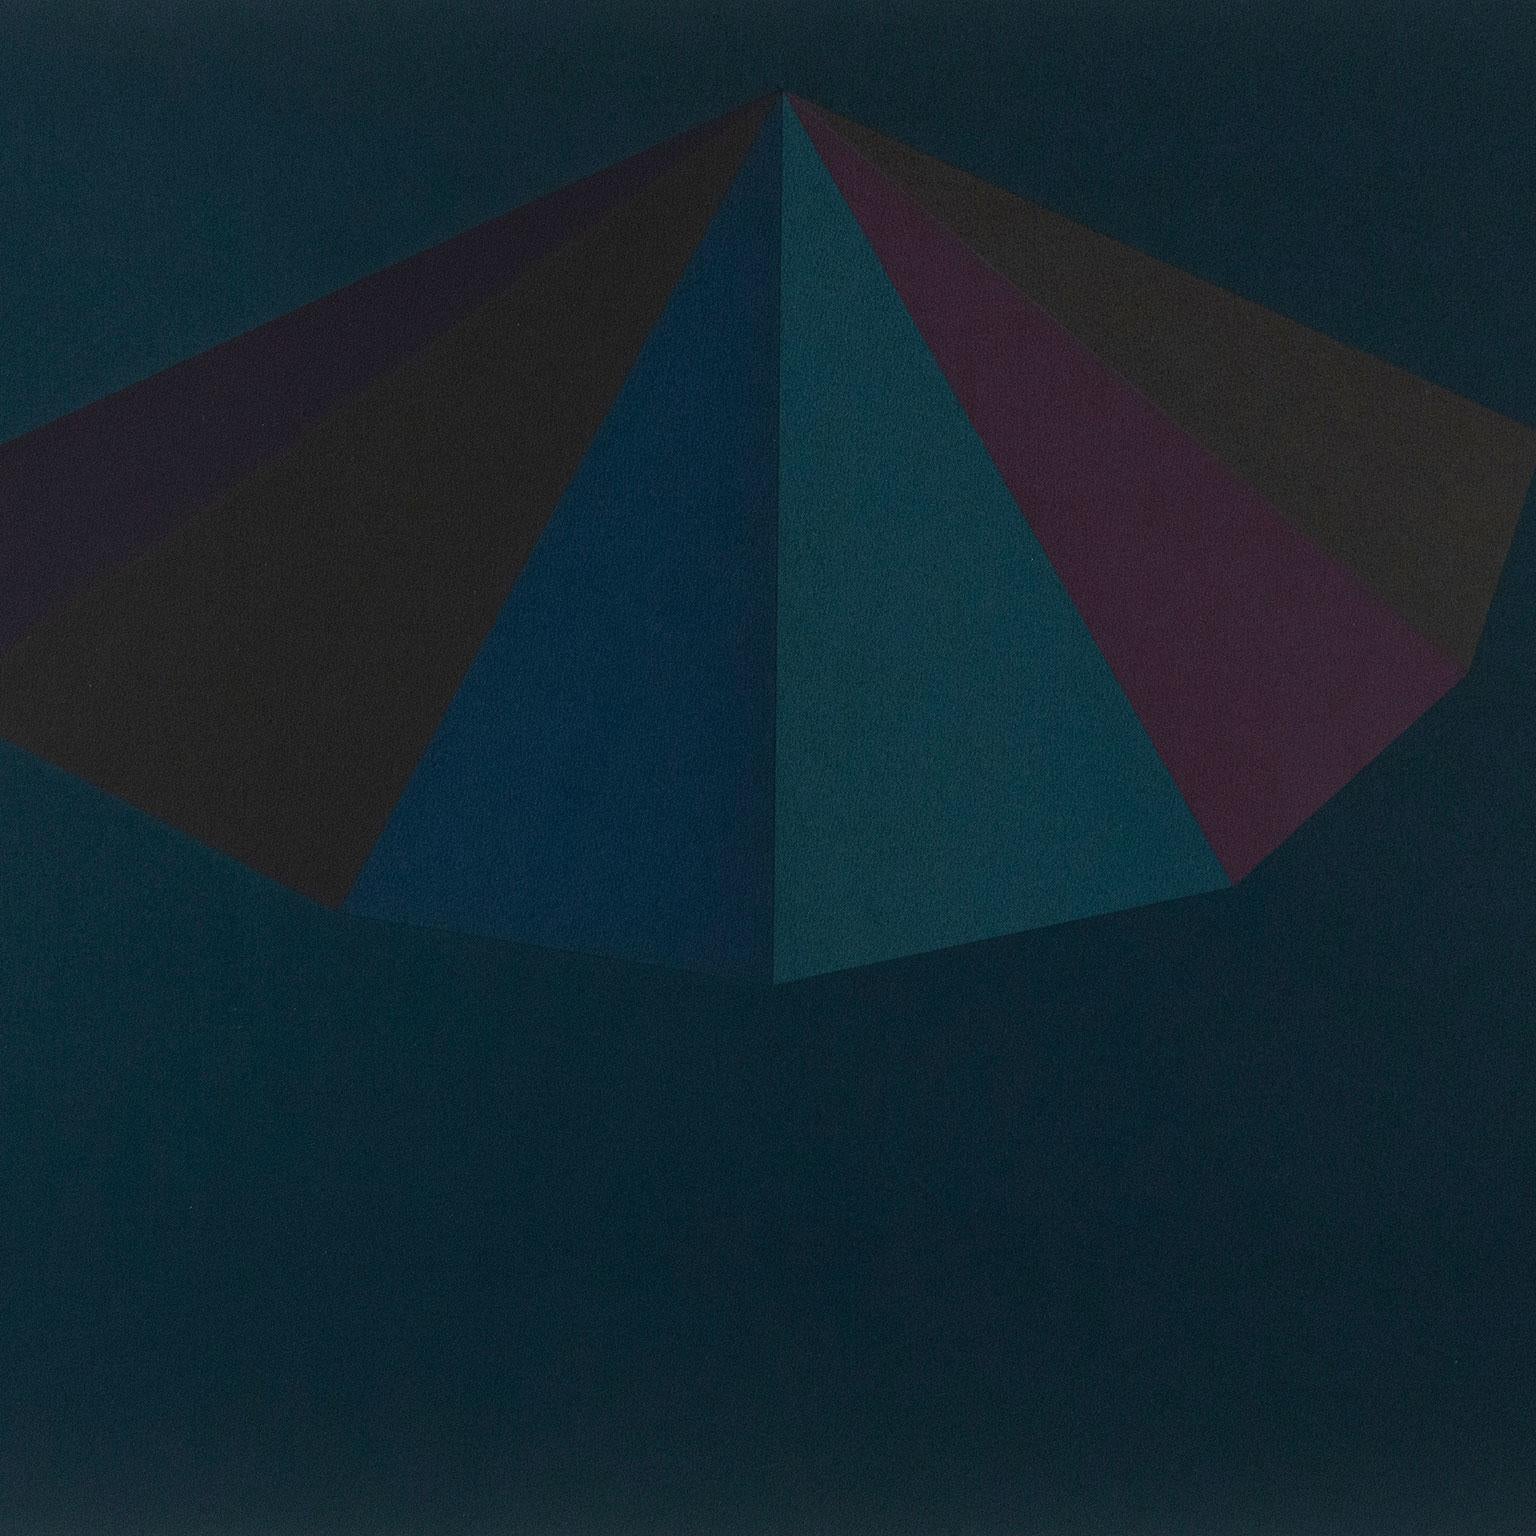 Sol LeWitt (1928-2007) is an important contributor to the 20th century's most cerebral 